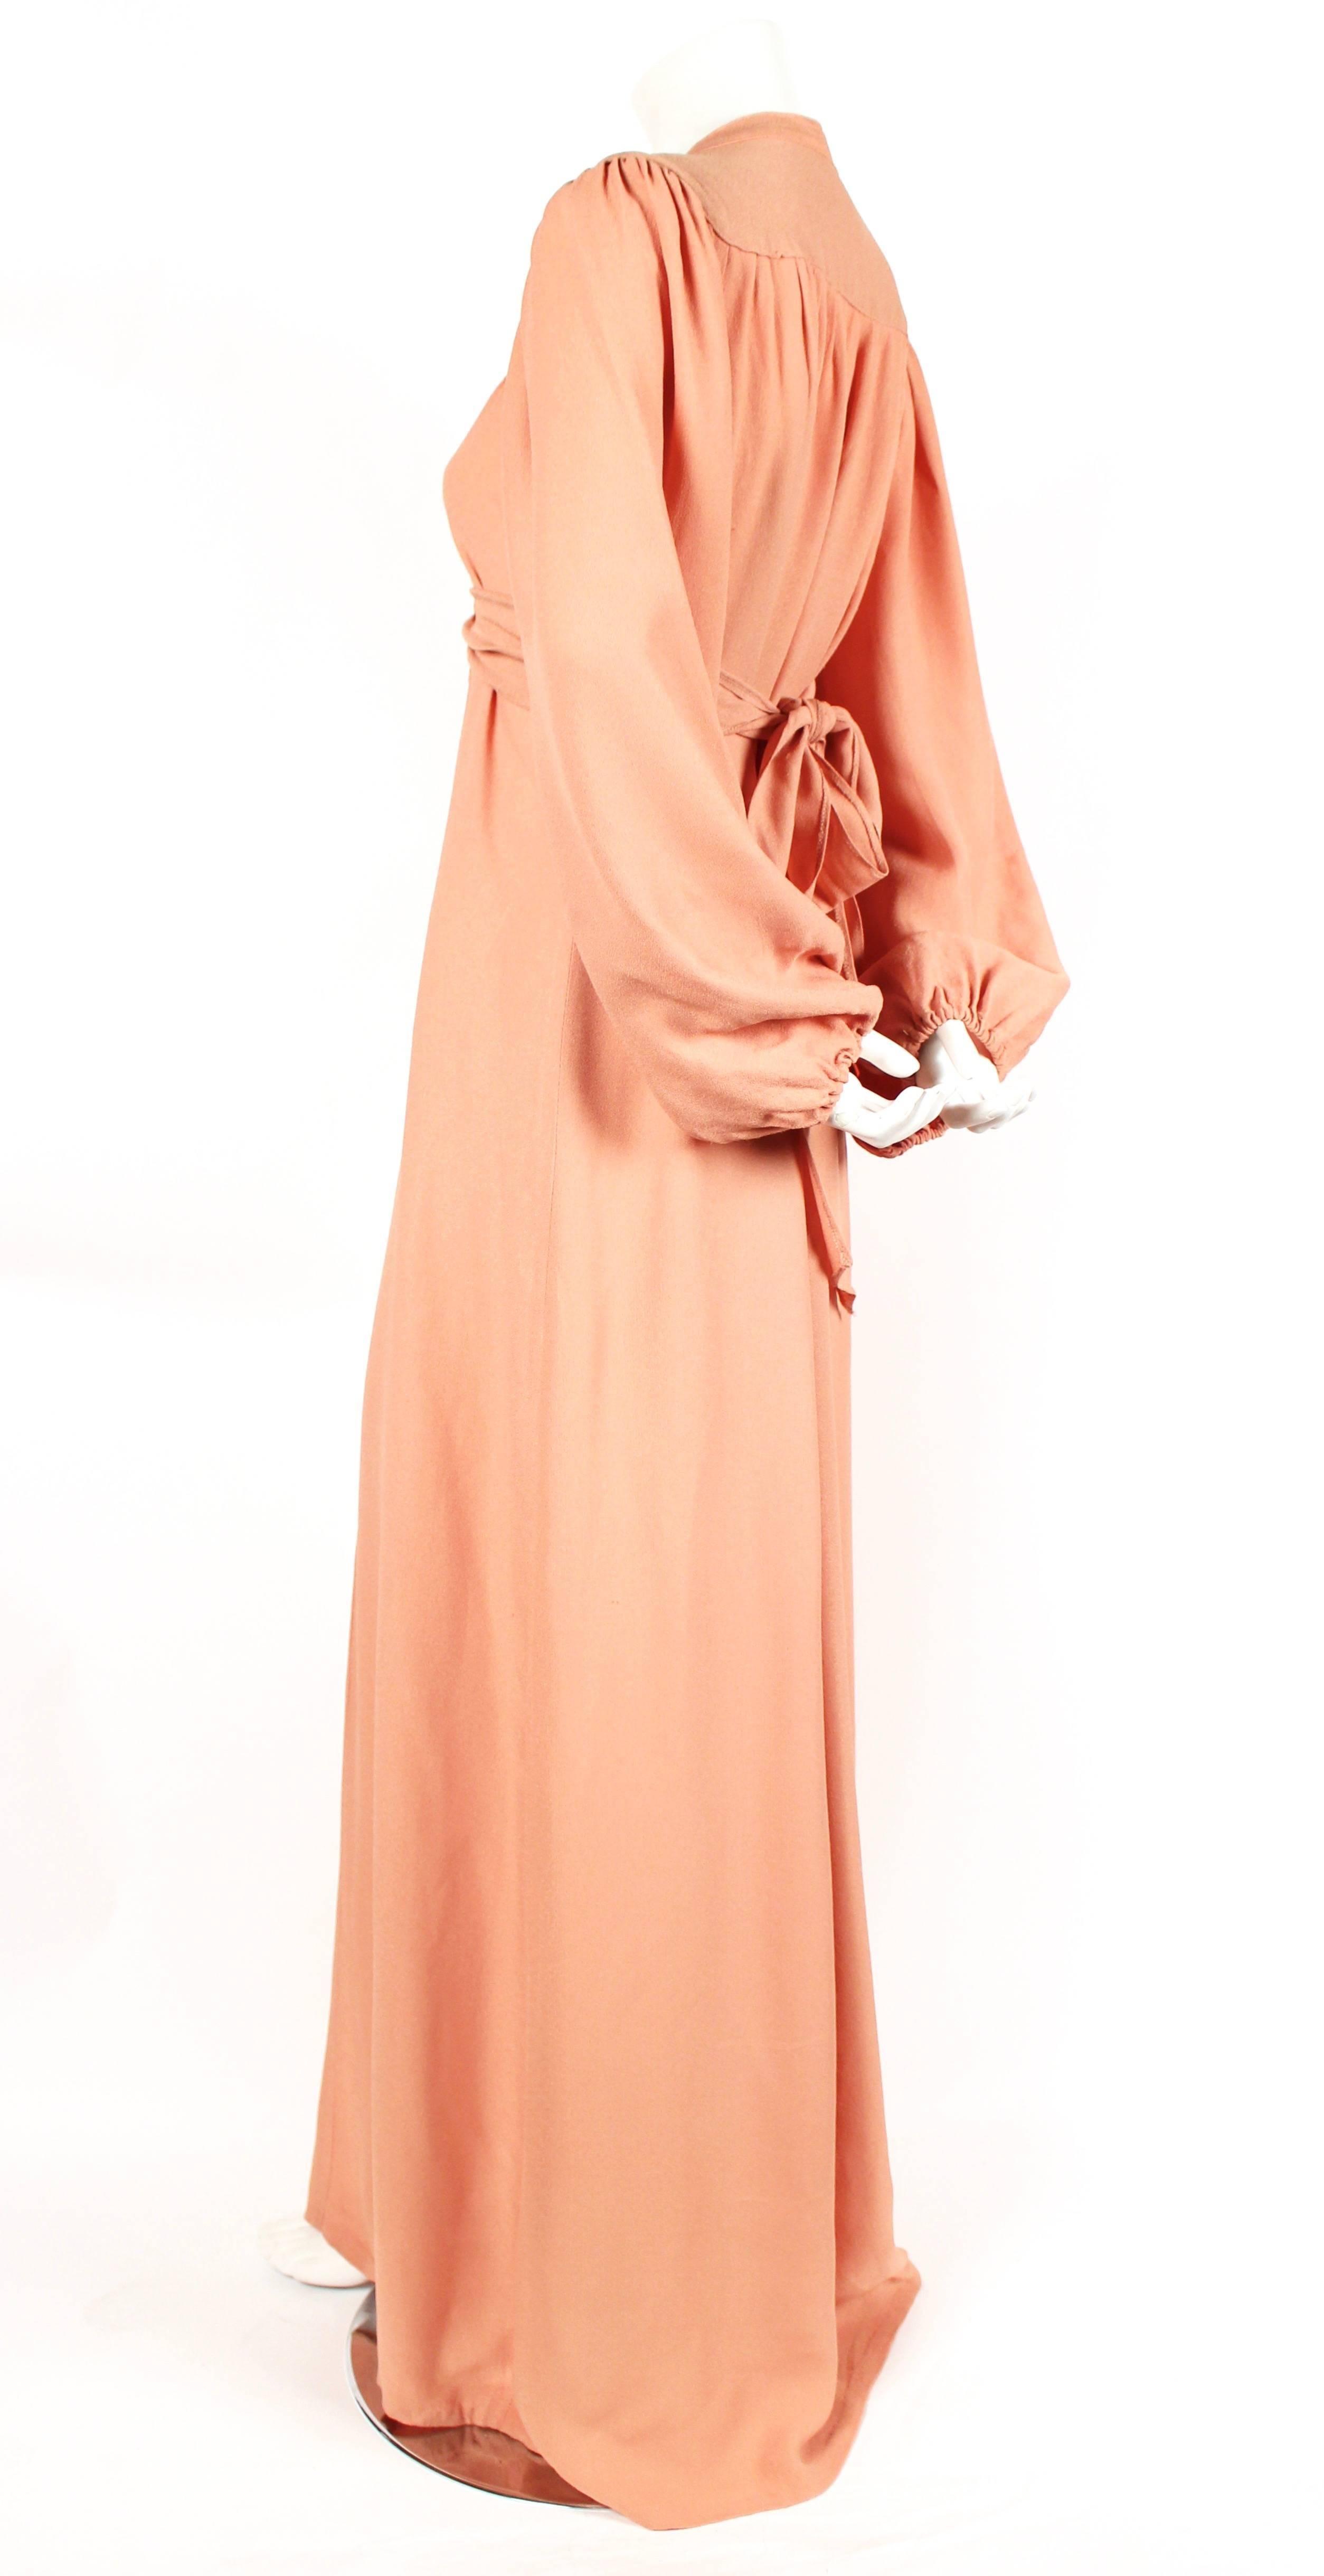 Salmon moss crepe maxi dress with billow sleeves, empire waist and neck tie designed by Ossie Clark dating to the 1970's. No size is indicated however this will fit many sizes due to the loose cut with adjustable waist tie. Approximate measurements: